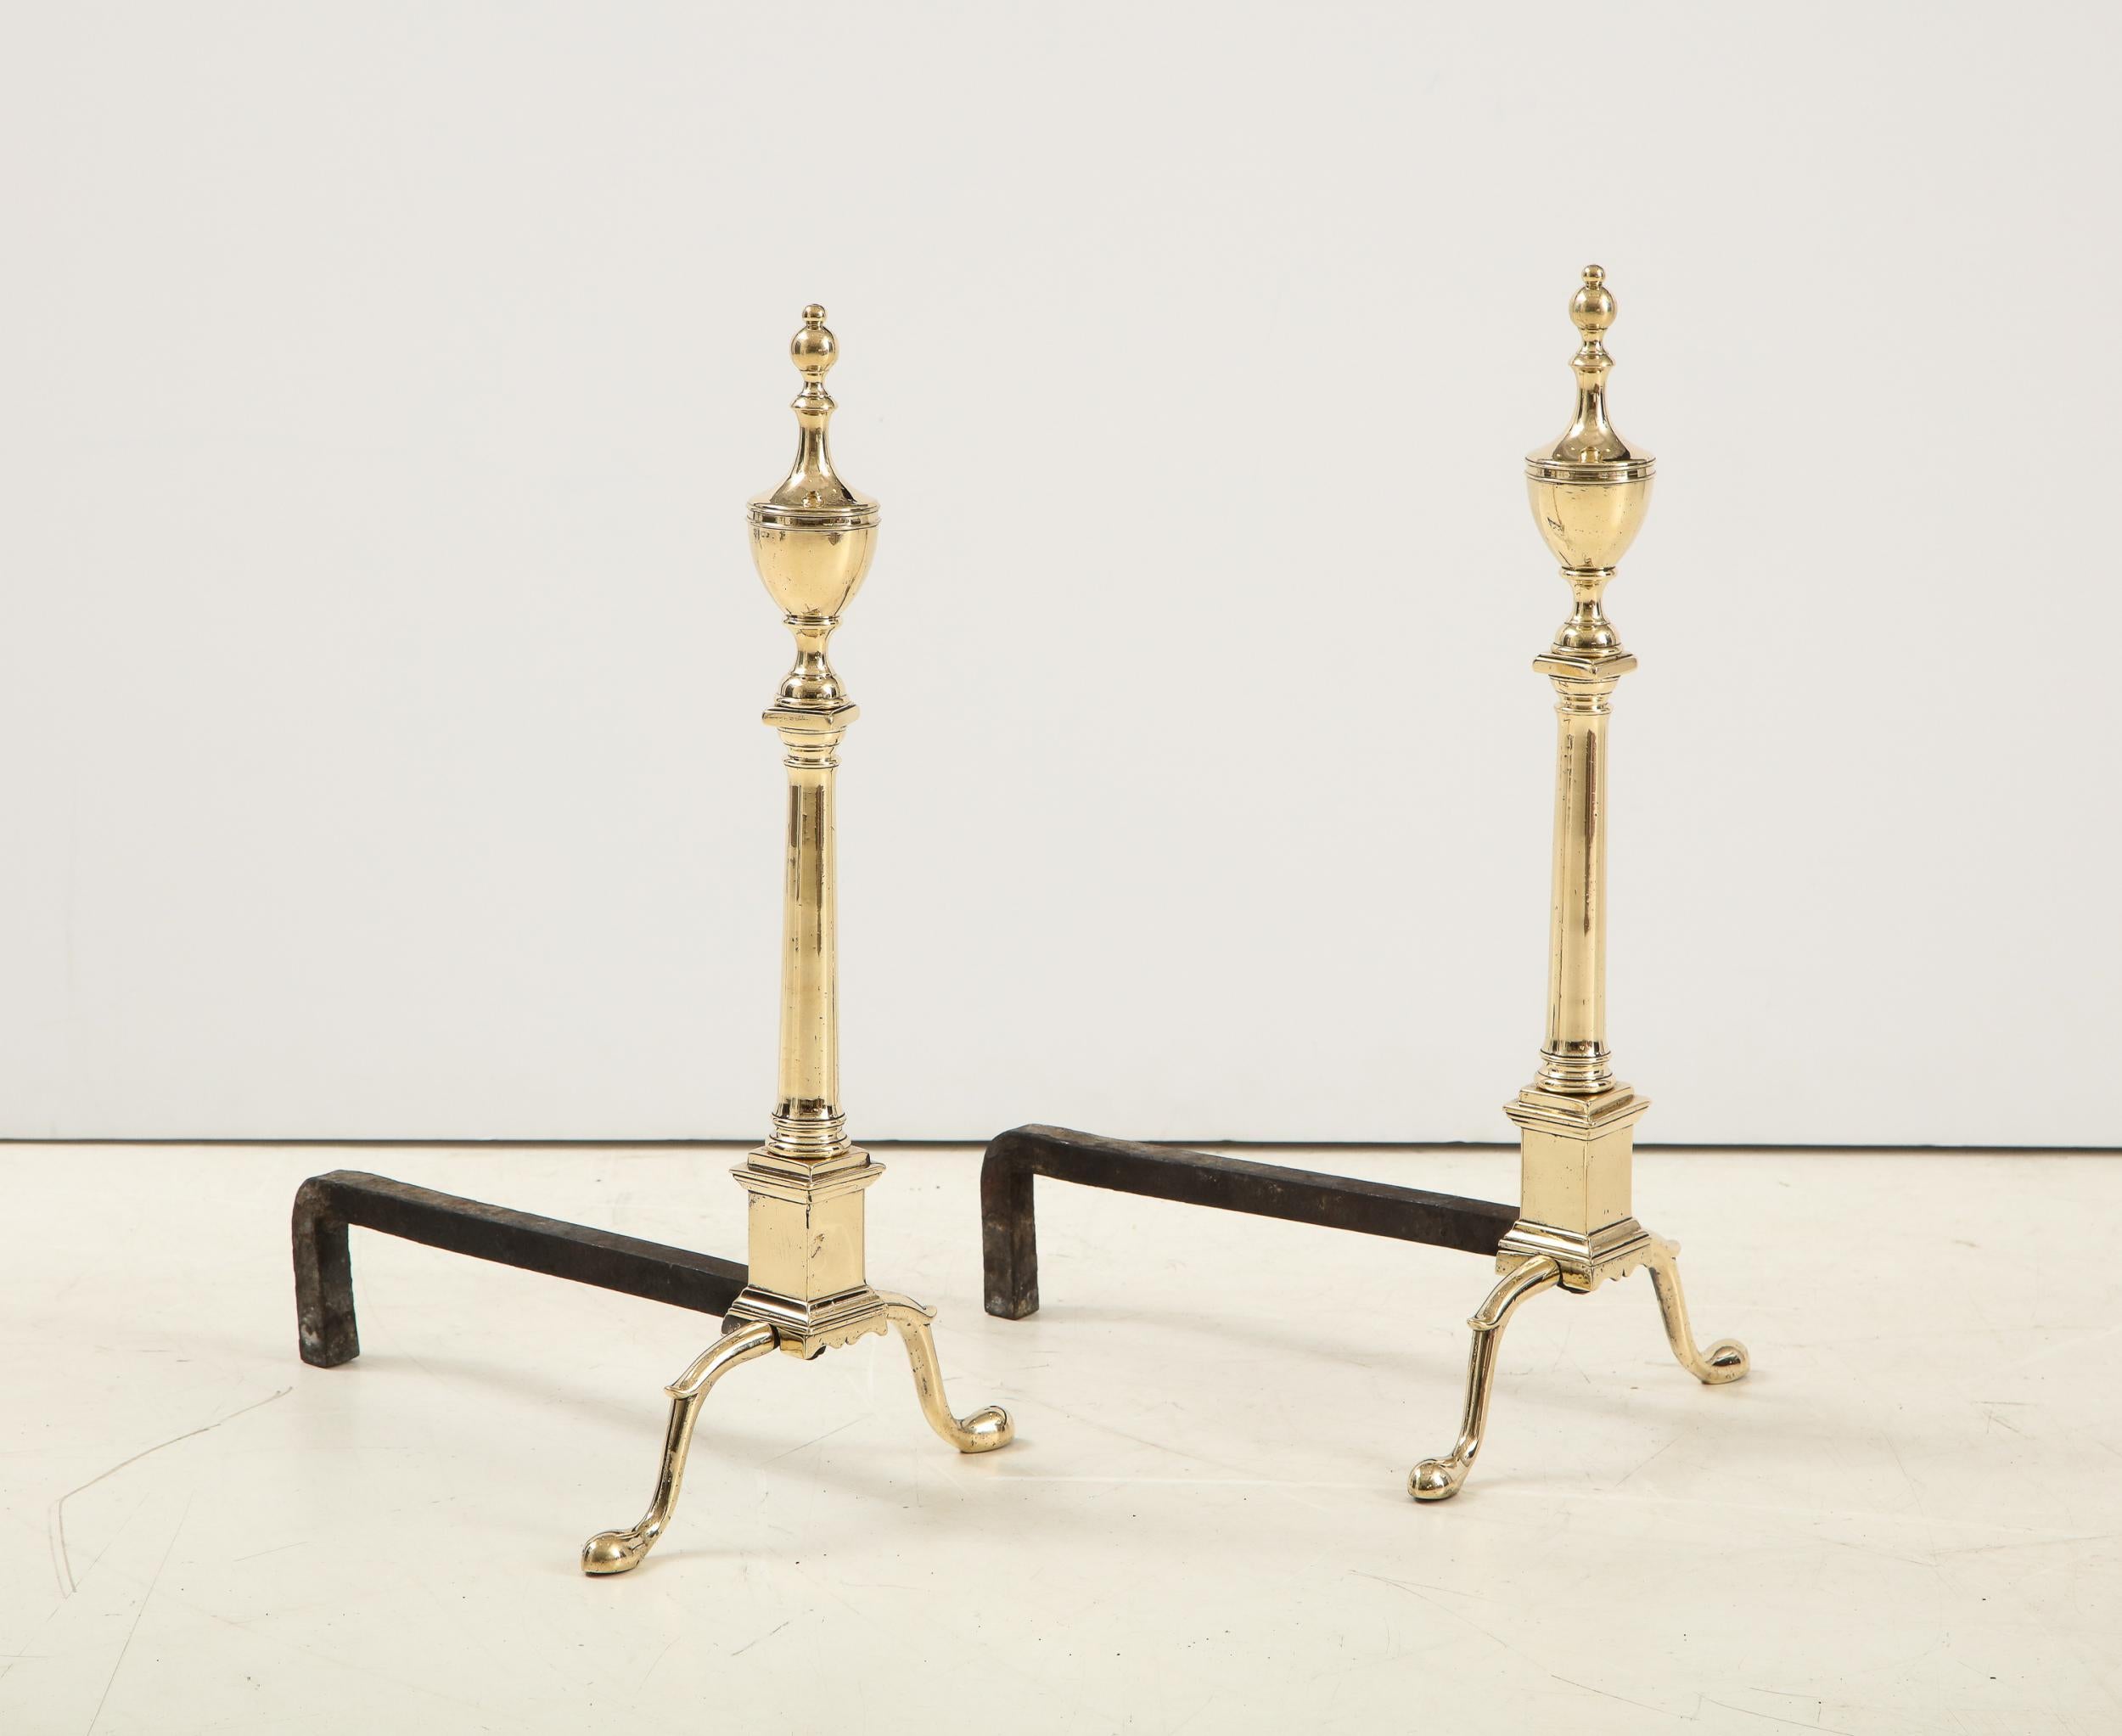 Fine pair of American classical Federal andirons, having urn finials over Doric column shafts standing on square plinths with scalloped base, over shaped legs having spurred knees and cabriole legs. The metal is either a pale bell metal or brass